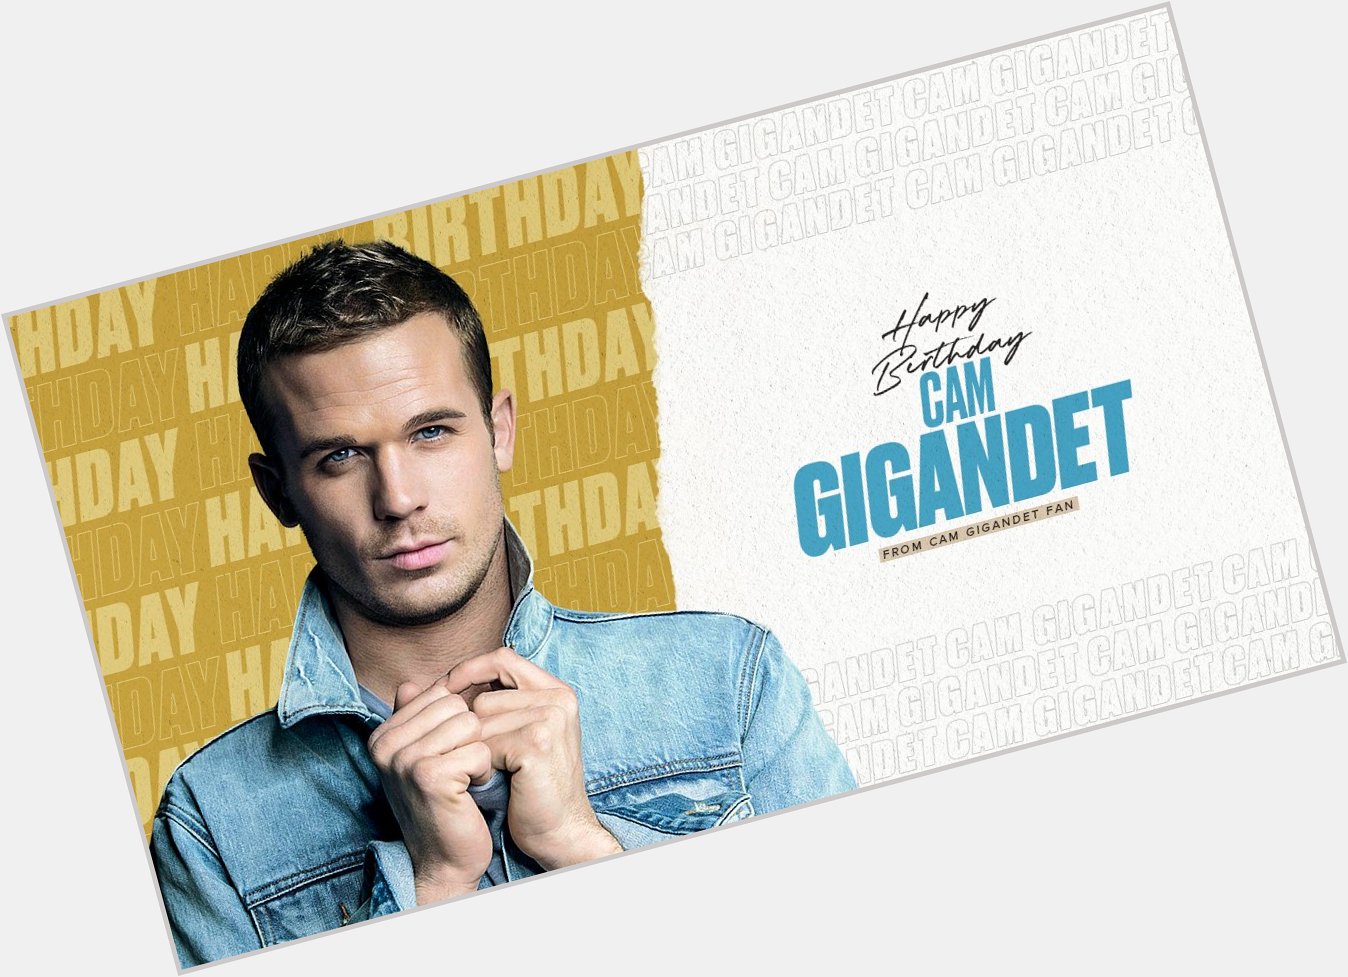 Wishing Cam Gigandet a very happy birthday! Have an amazing day. 